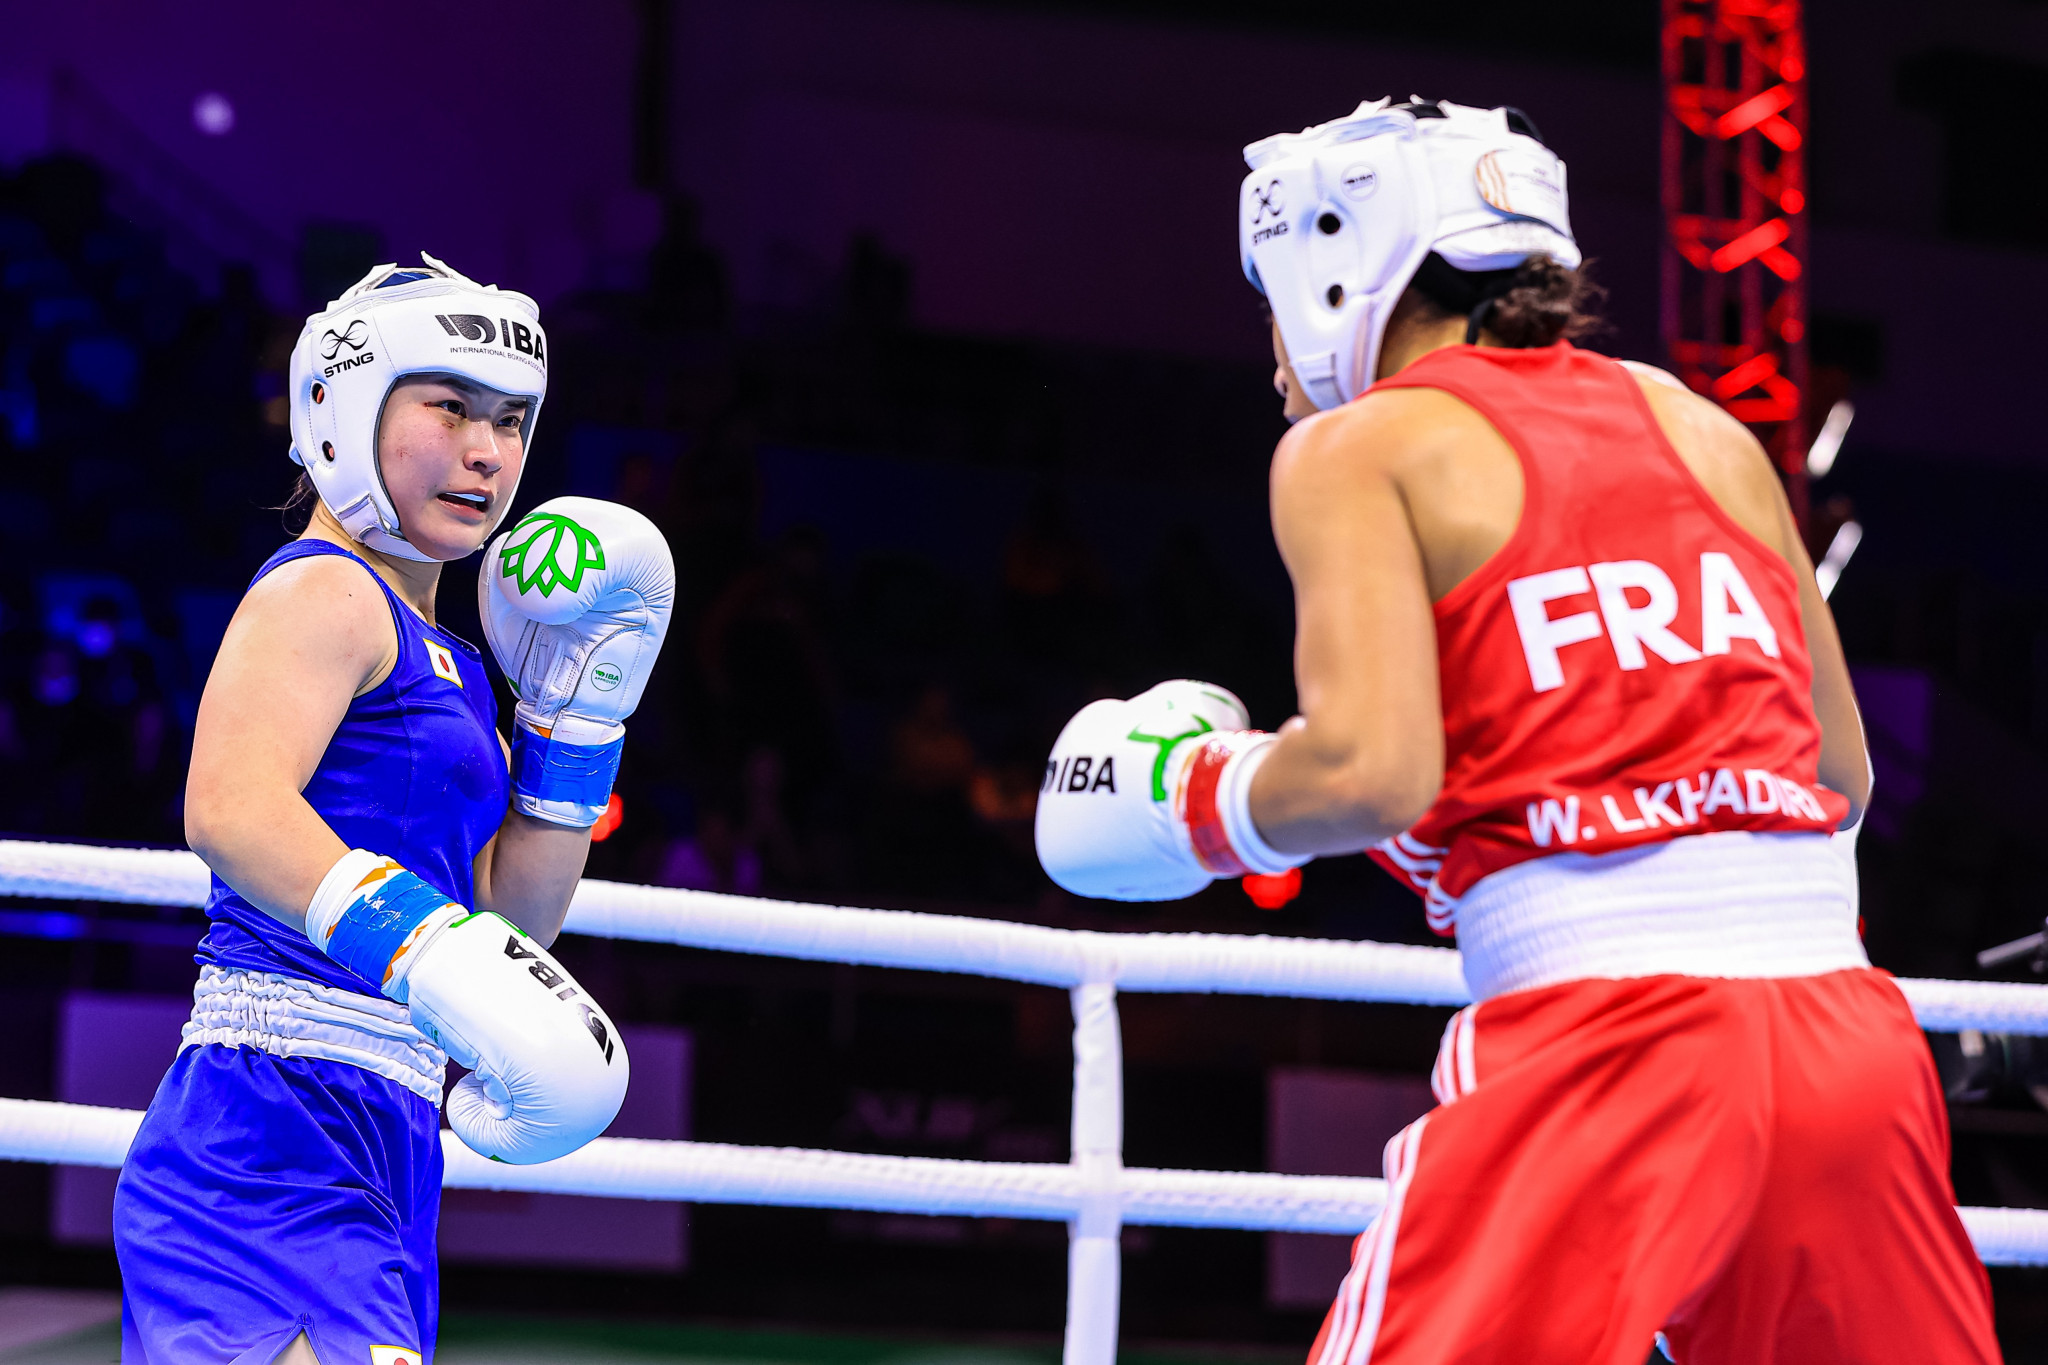 Japan's Tsukimi Namiki suffered a shock defeat to Wassila Lkhadiri of France ©IBA